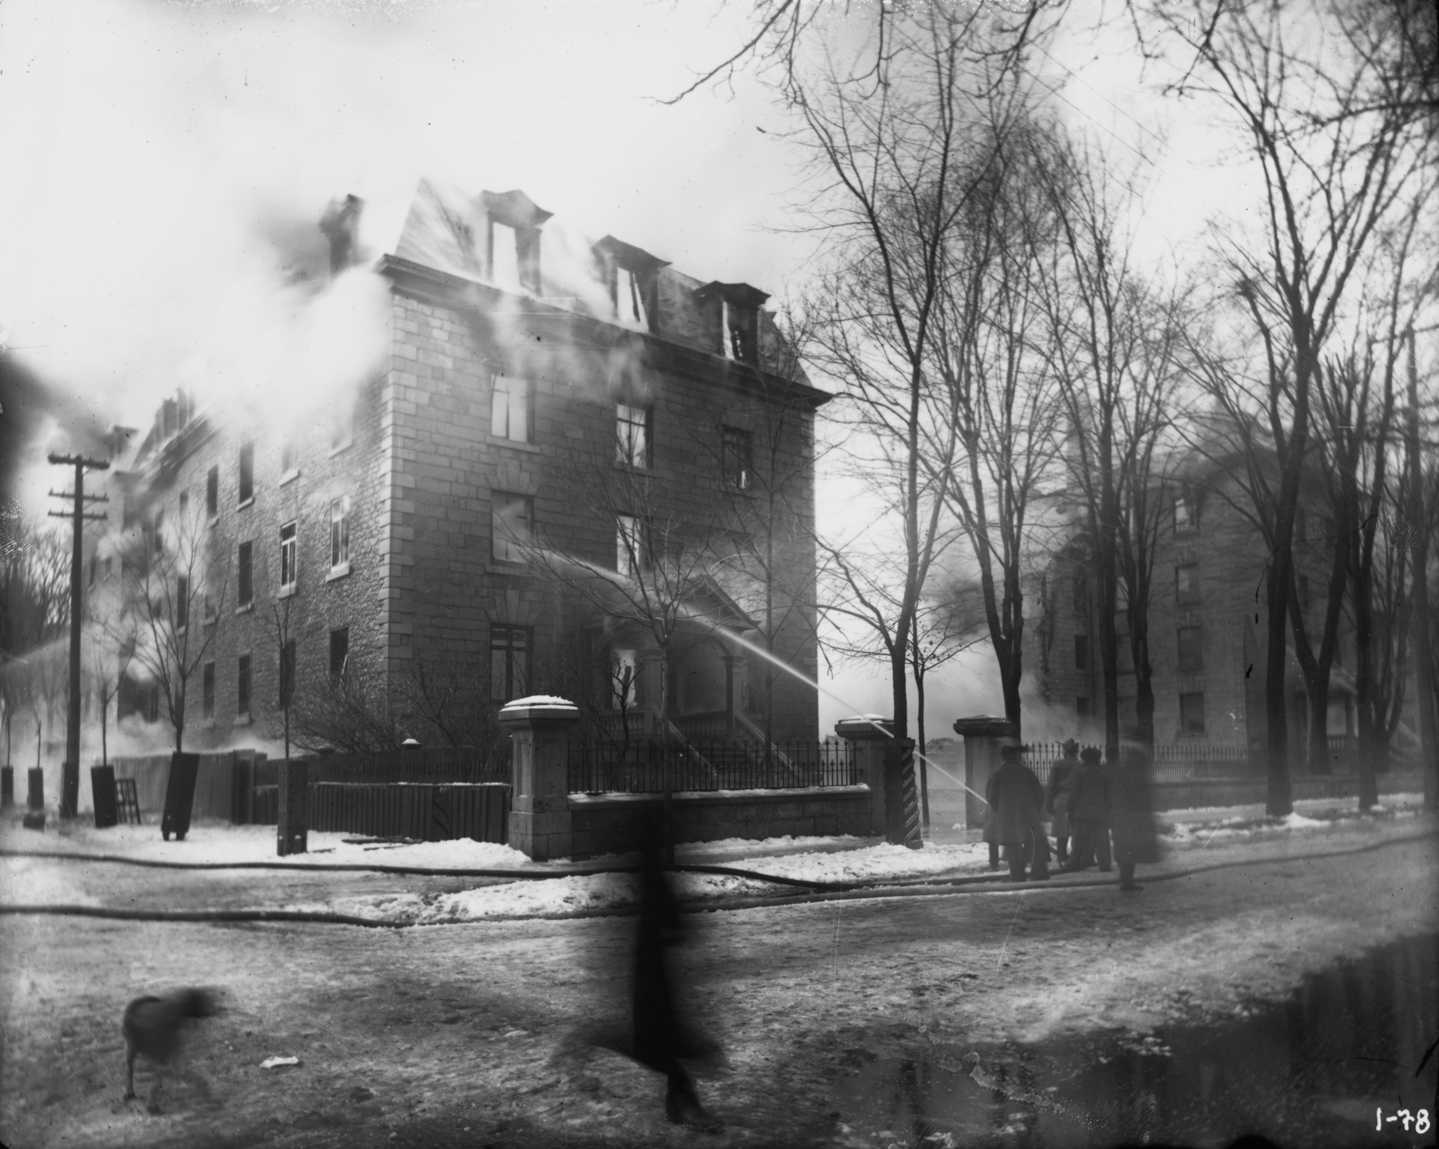 Photograph of the university's main building during the 1903 fire incident